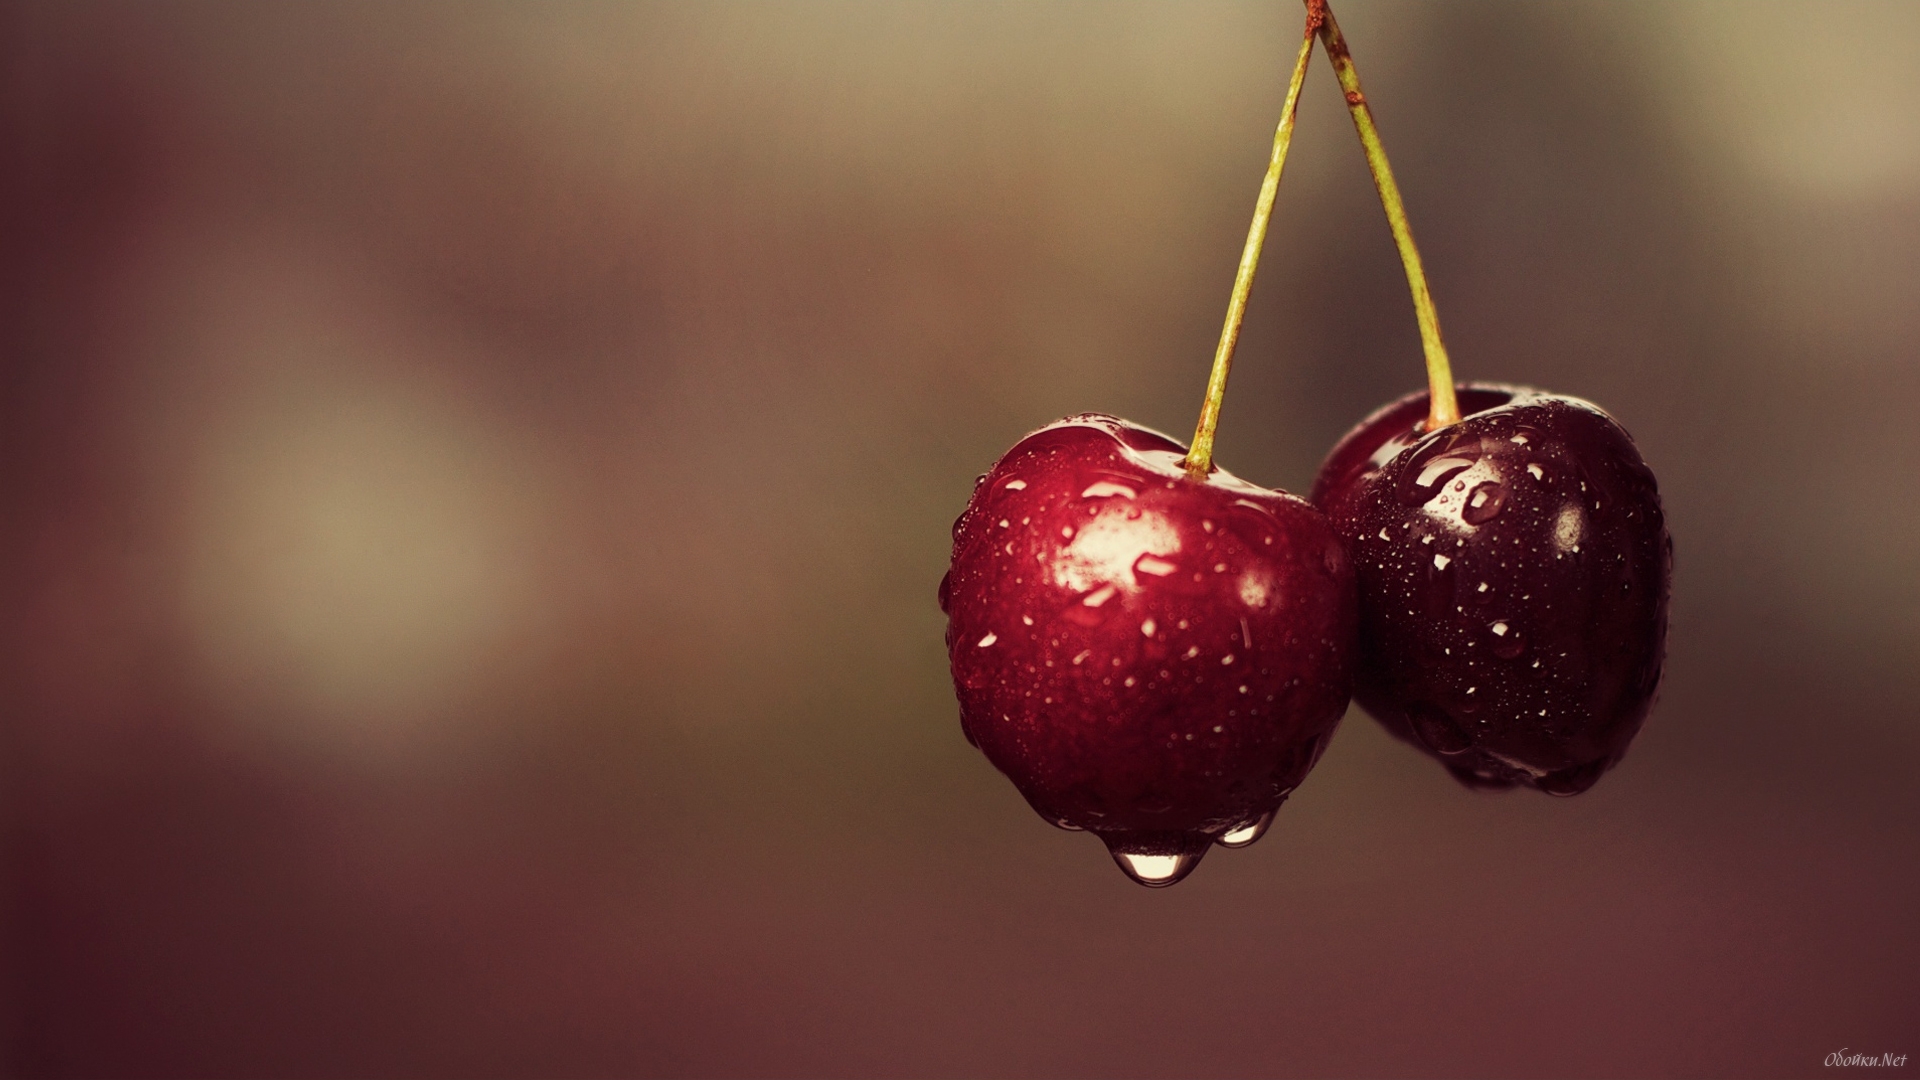 Mobile wallpaper: Food, Cherry, Fruits, 17149 download the picture for free.